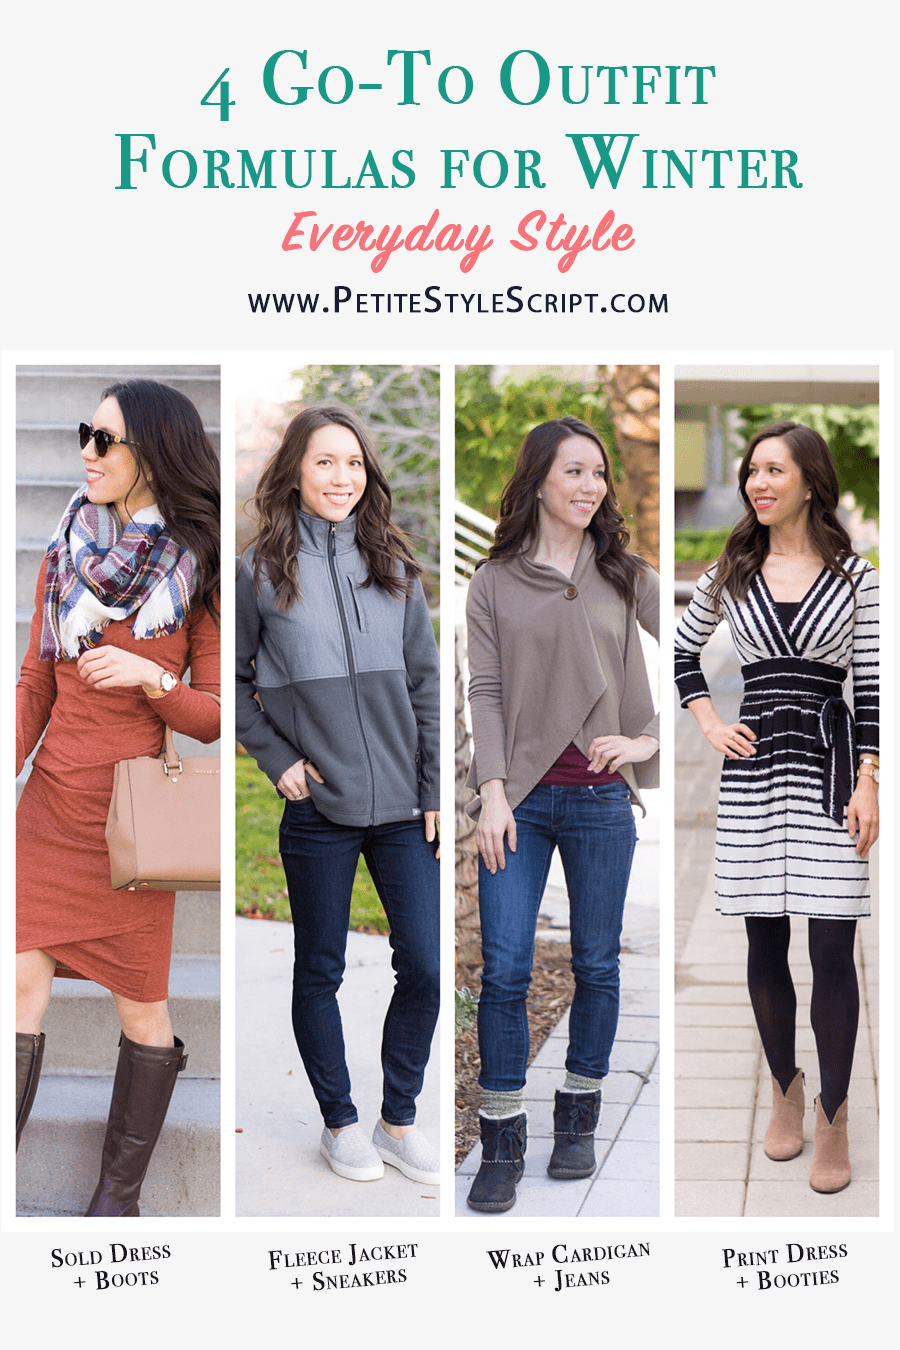 4 Go-To Outfit Formulas for Winter - Petite Style Script